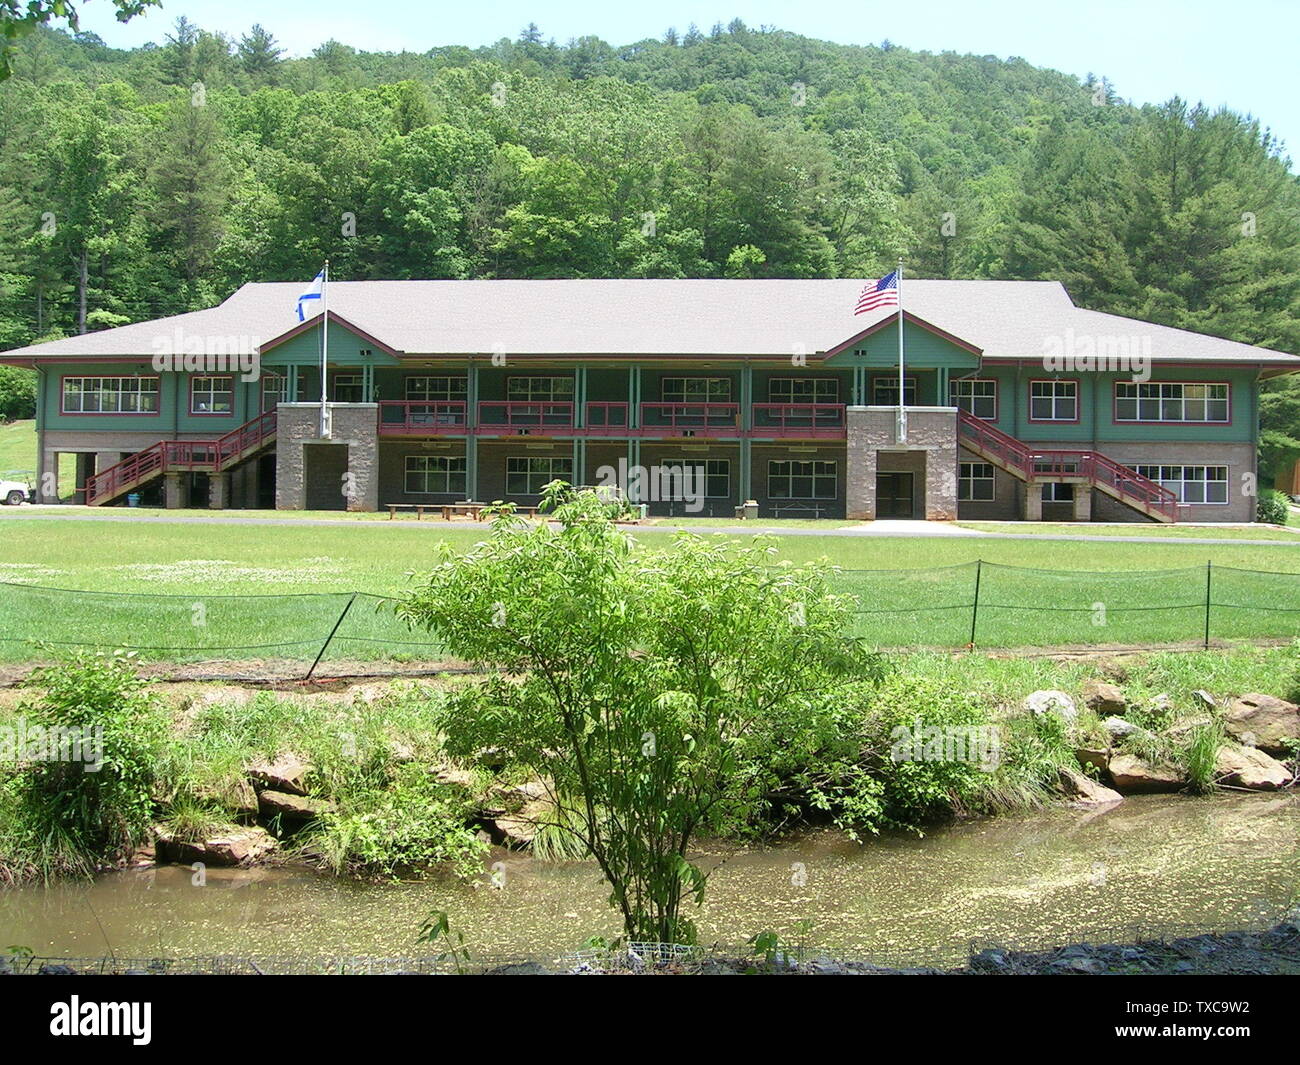 I took this picture in 2005 at Camp Ramah Darom. I am uploading this picture to put on its page.; 6 June 2005Â (according to Exif data); Own work by the original uploader; User:Burgerboy5753; Stock Photo